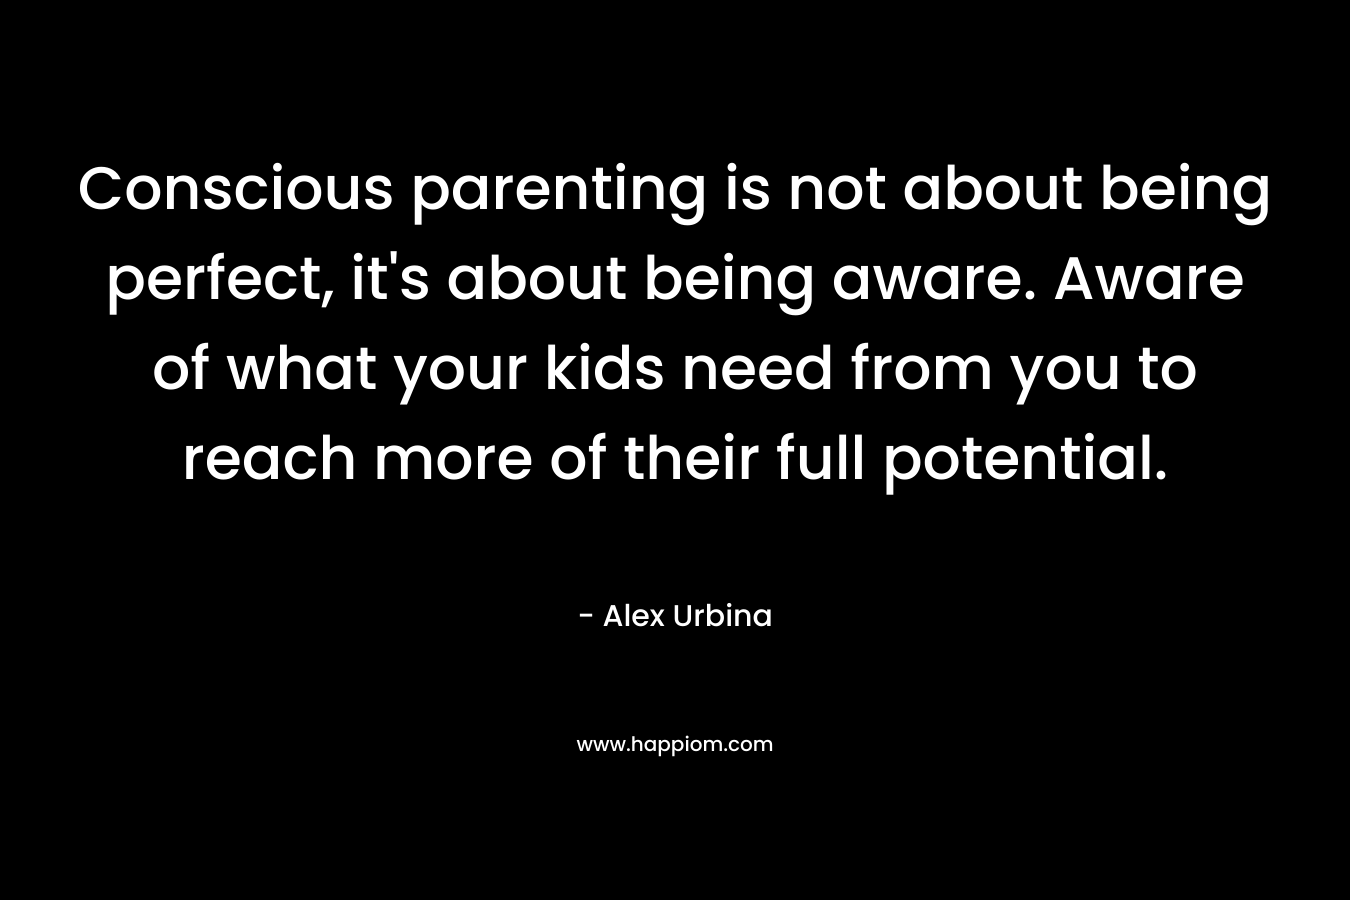 Conscious parenting is not about being perfect, it's about being aware. Aware of what your kids need from you to reach more of their full potential.